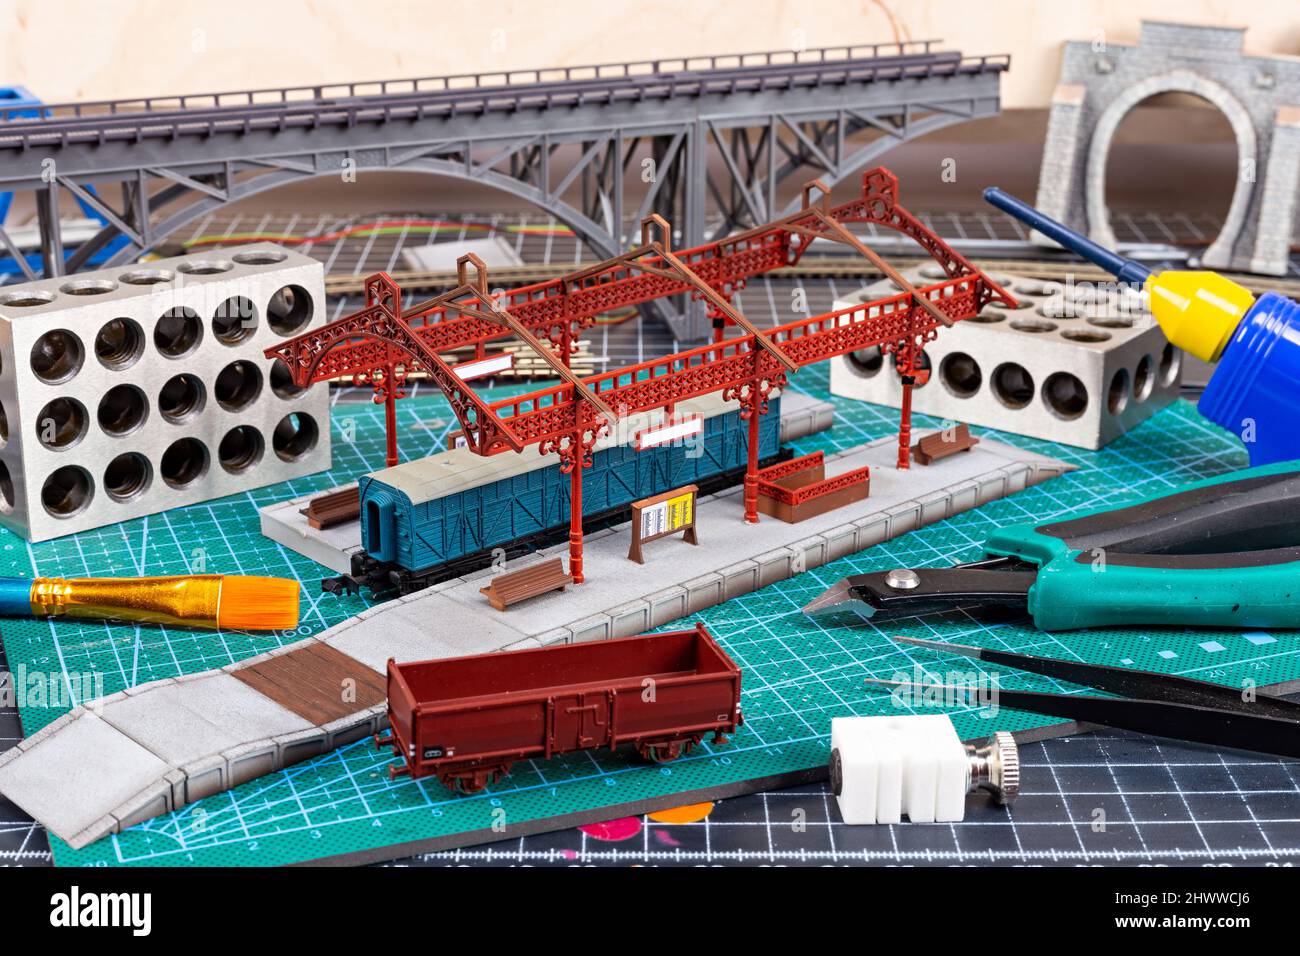 construction of a model railroad layout. workbench with model railway train station bridge tracks and landscape tools. hobby leisure scale modelling c Stock Photo